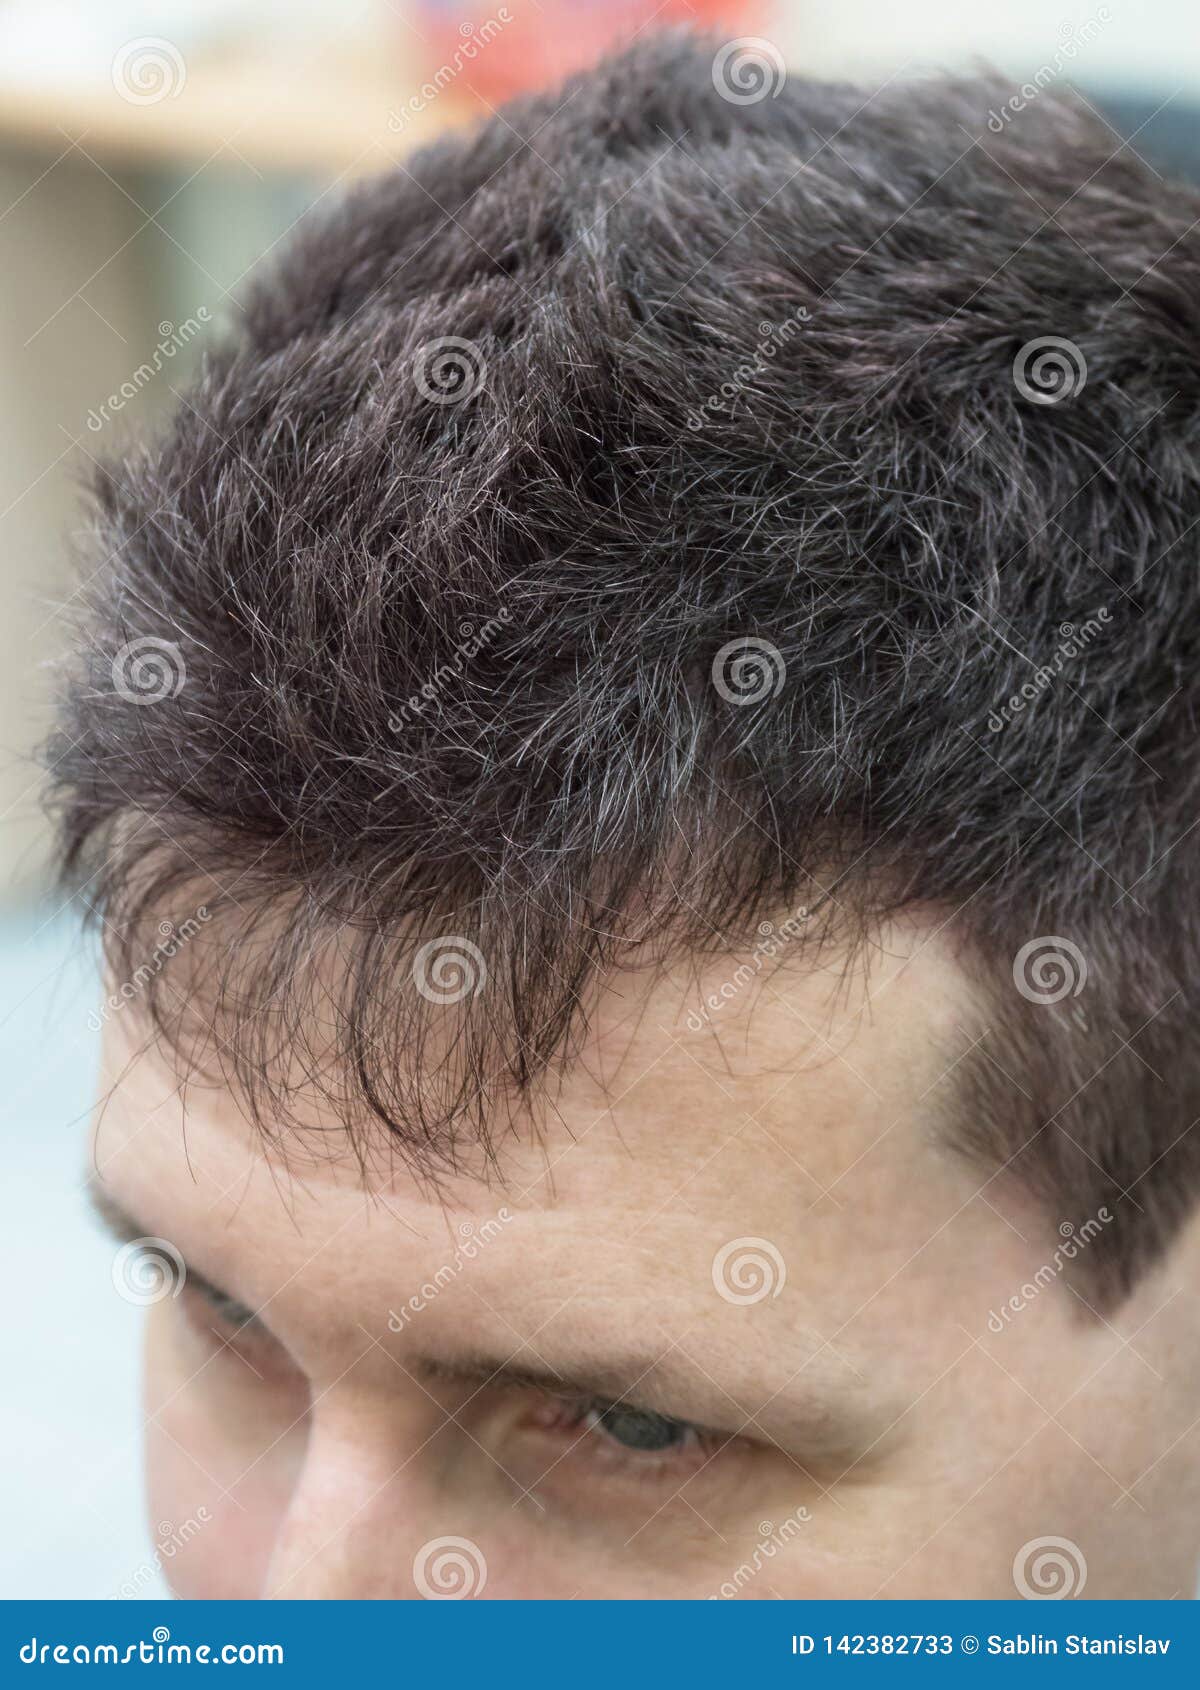 A Man With Short Thick And Gray Hair Stock Image Image